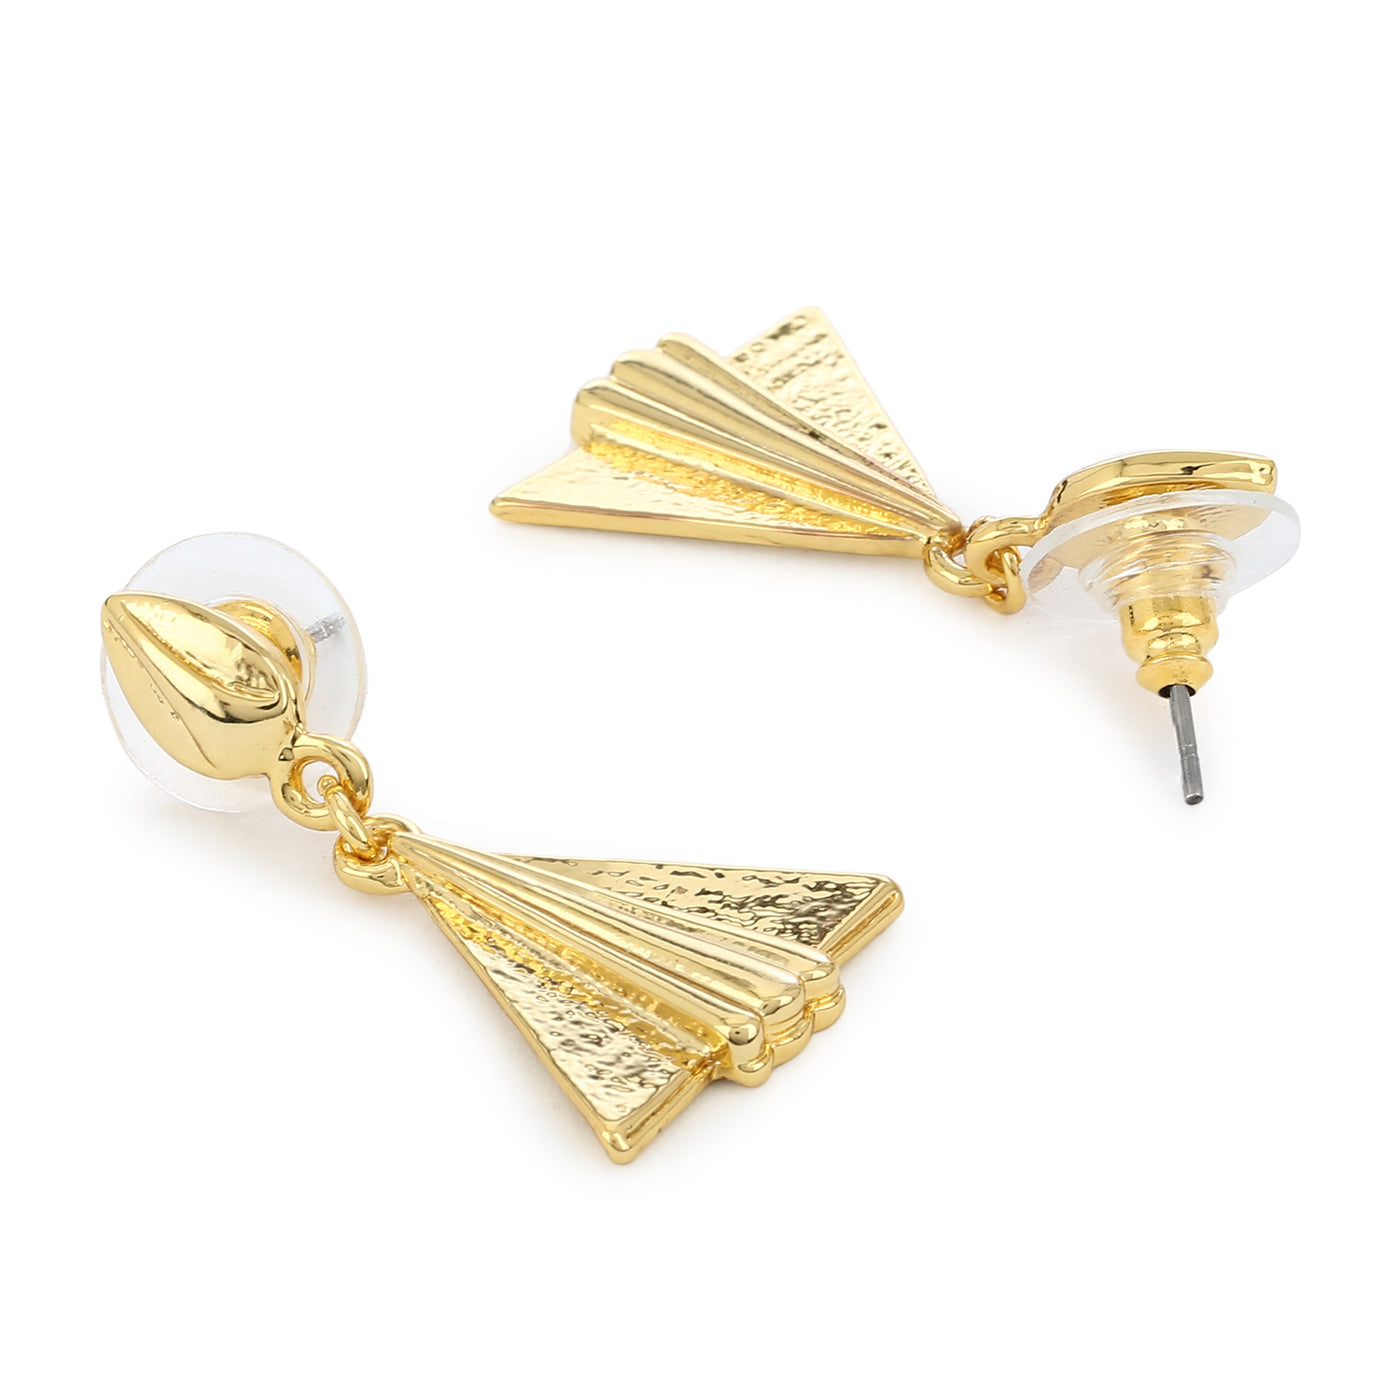 Gold Tone Plated Triangle Shaped Drop Earrings